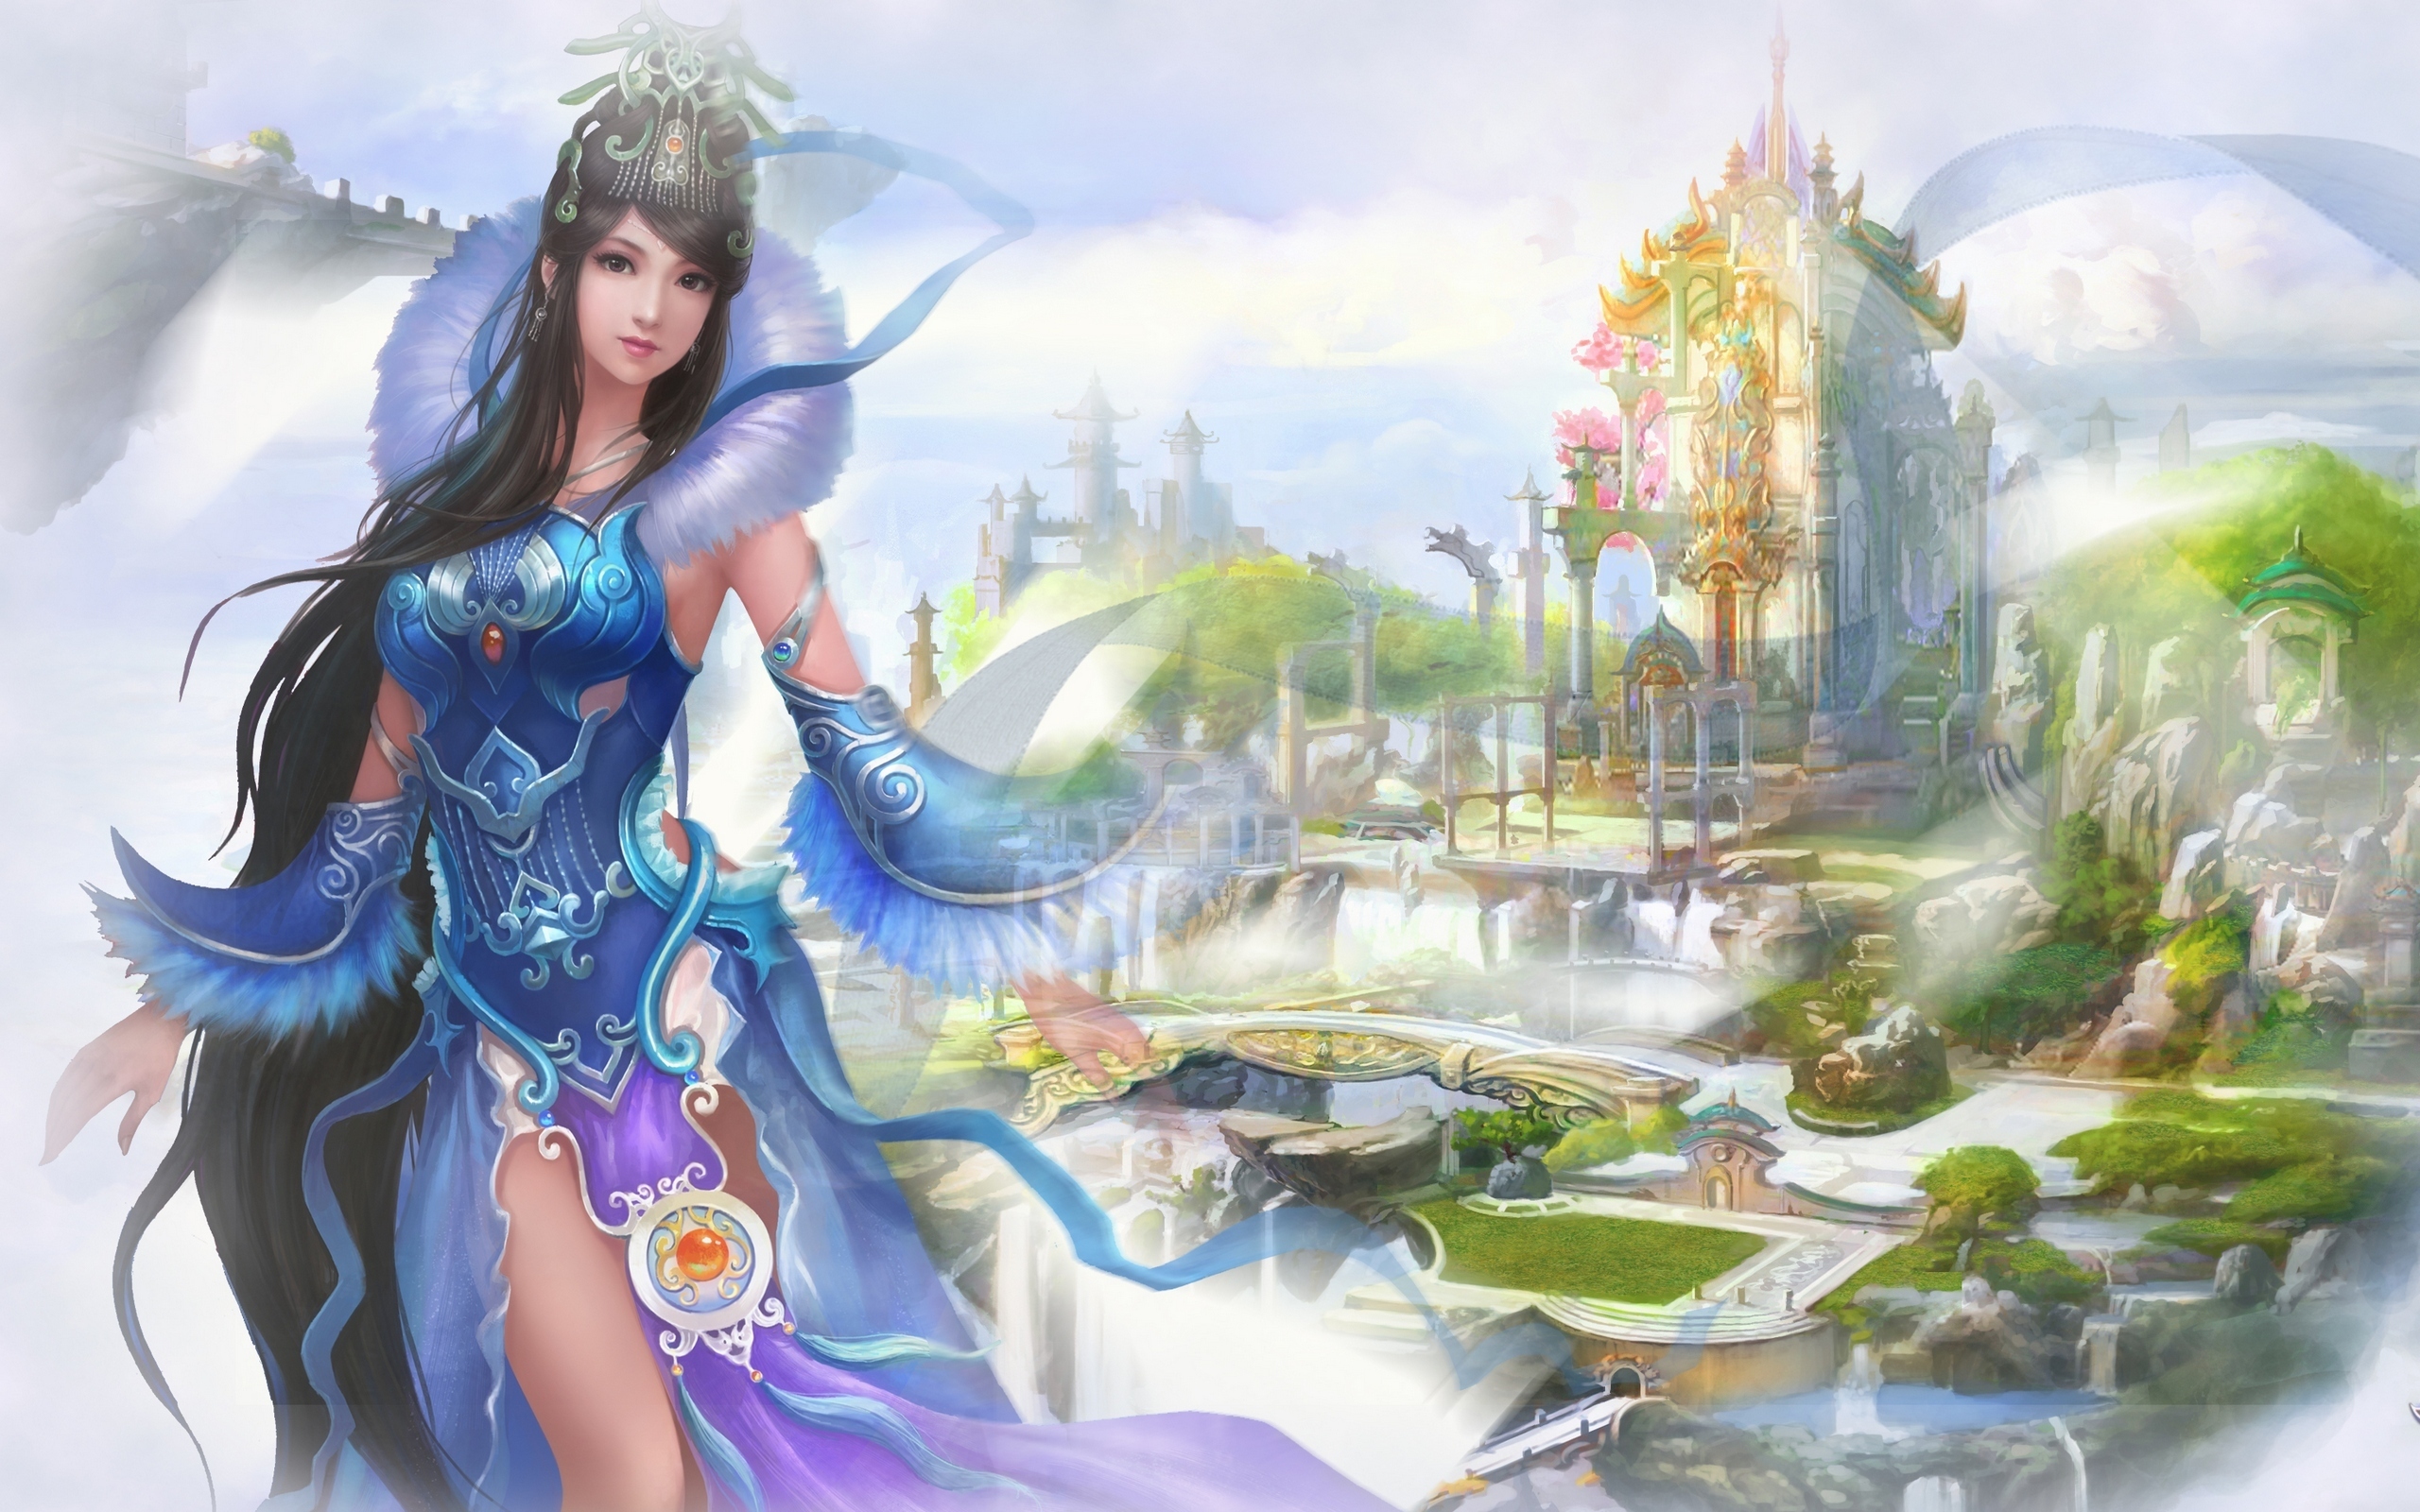 jade, Dynasty, Perfect, World, Mmorpg, China, Game, Wallpapers, Fantasy, Asian, Castle Wallpaper